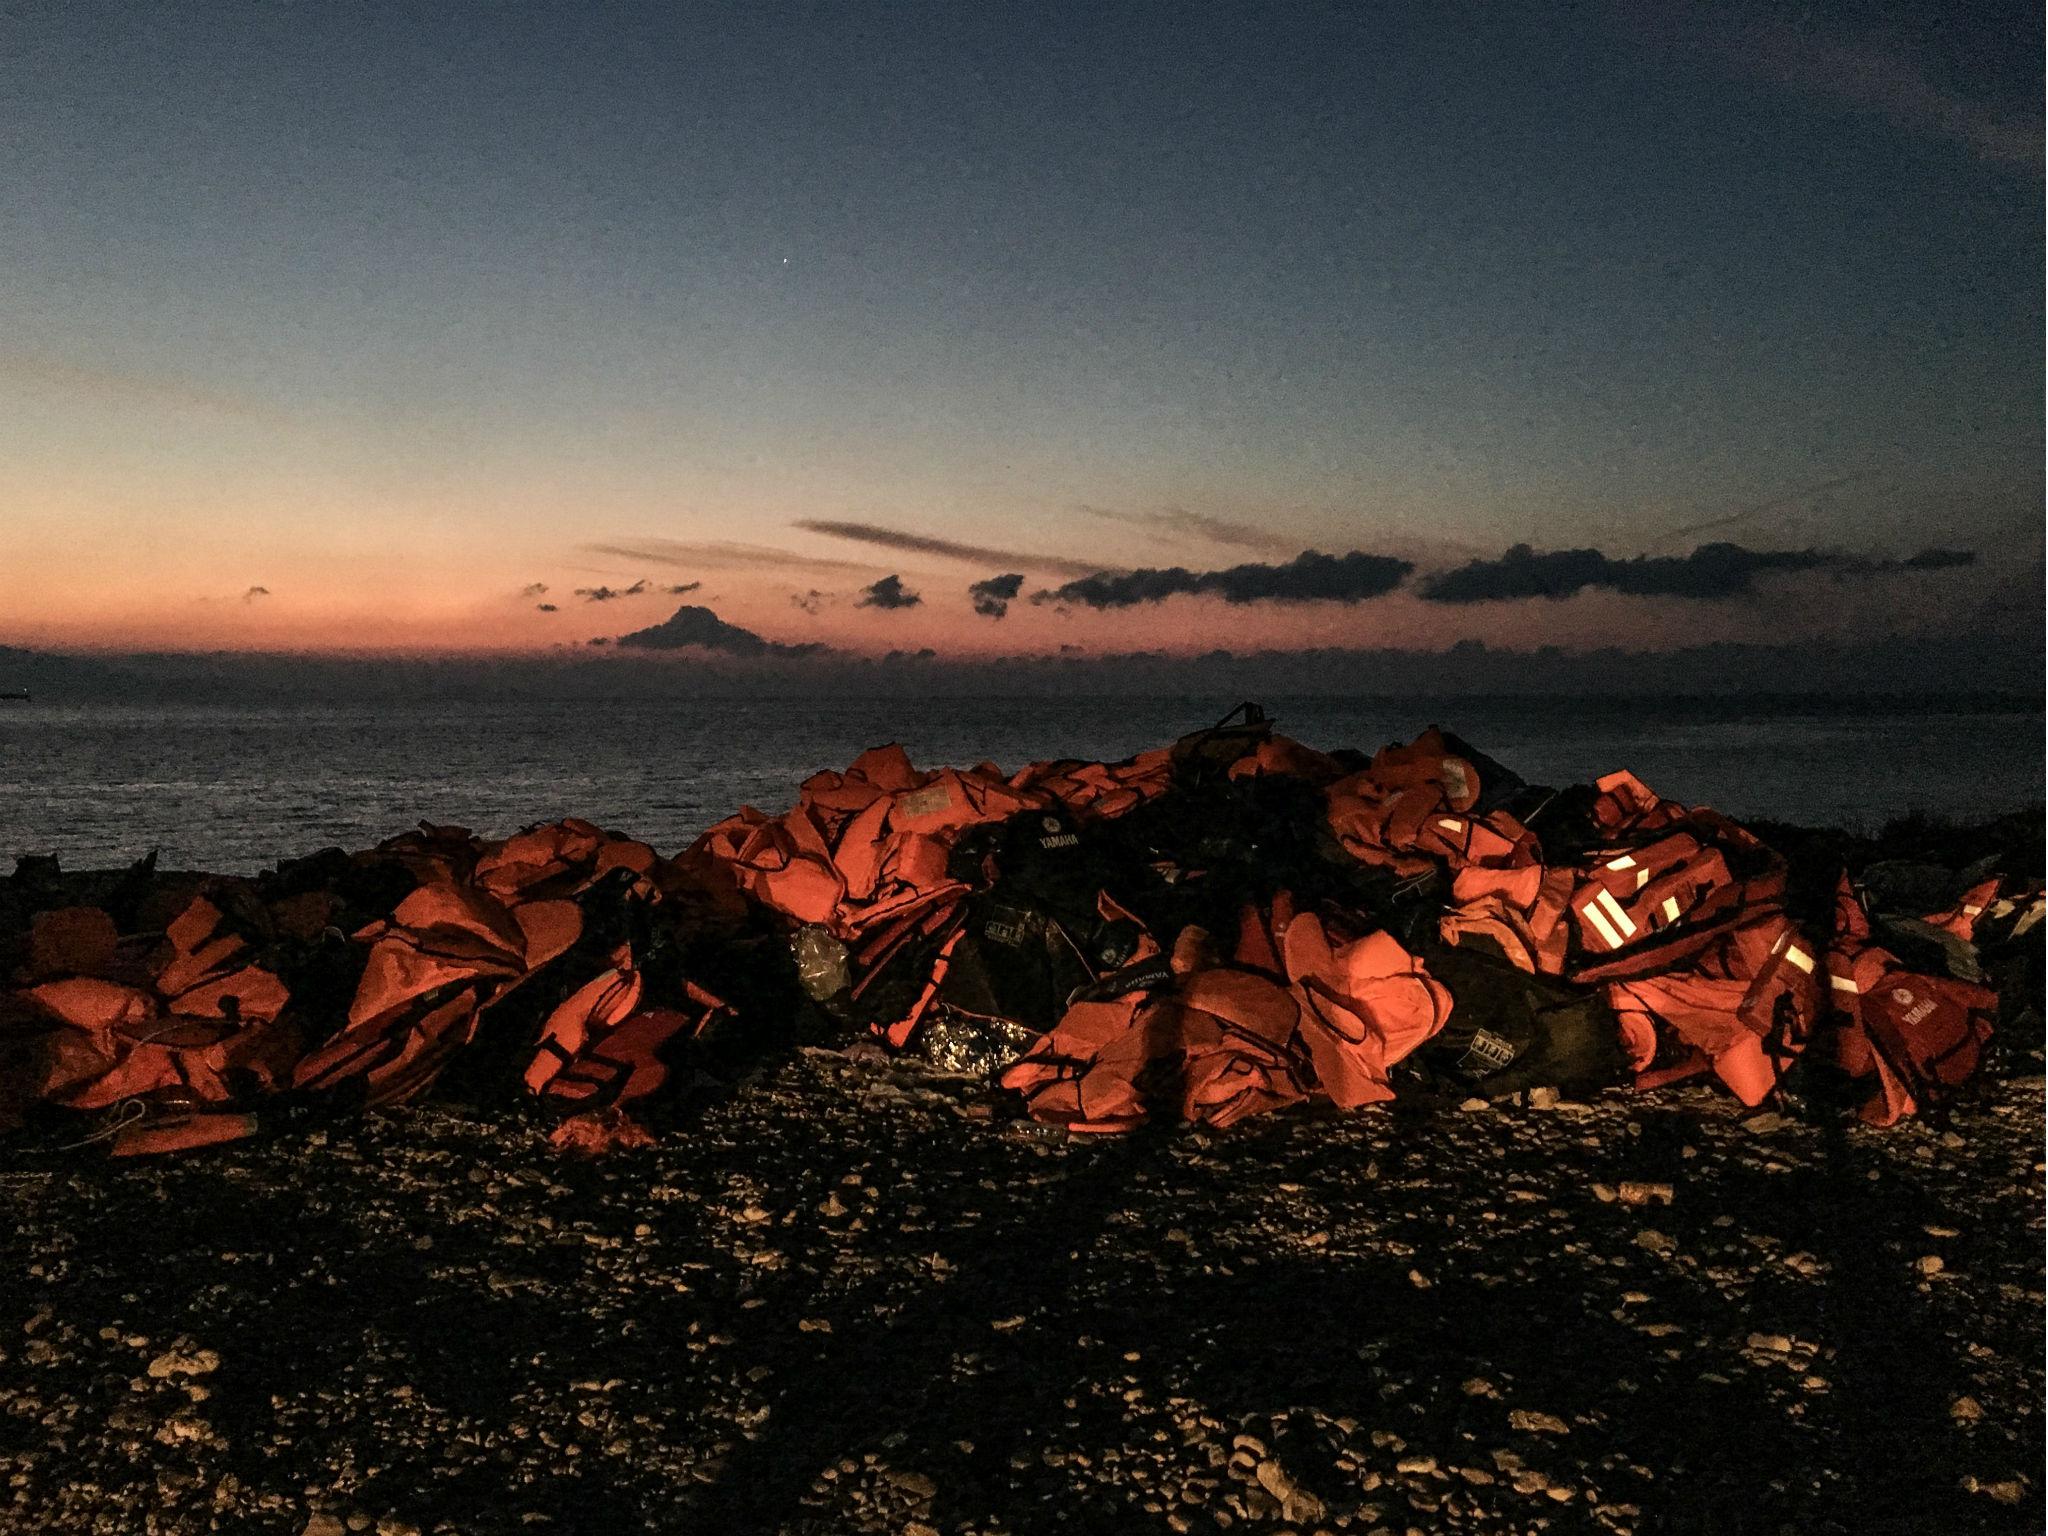 A beautiful but very haunting shot in the film of a pile discarded lifejackets used by refugees